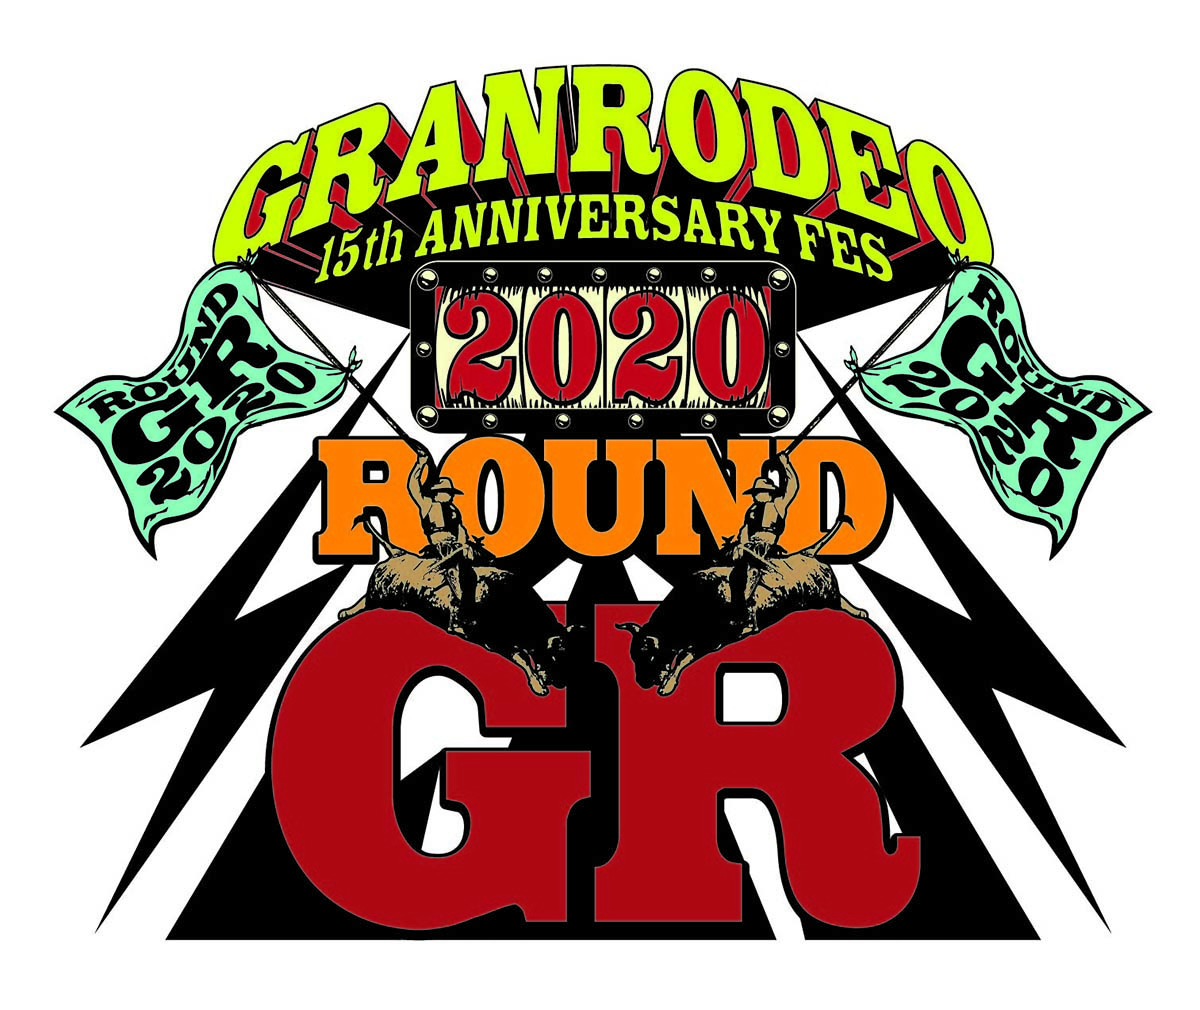 GRANRODEO主催フェス「GRANRODEO 15th ANNIVERSARY FES ROUND GR 2020」ロゴ